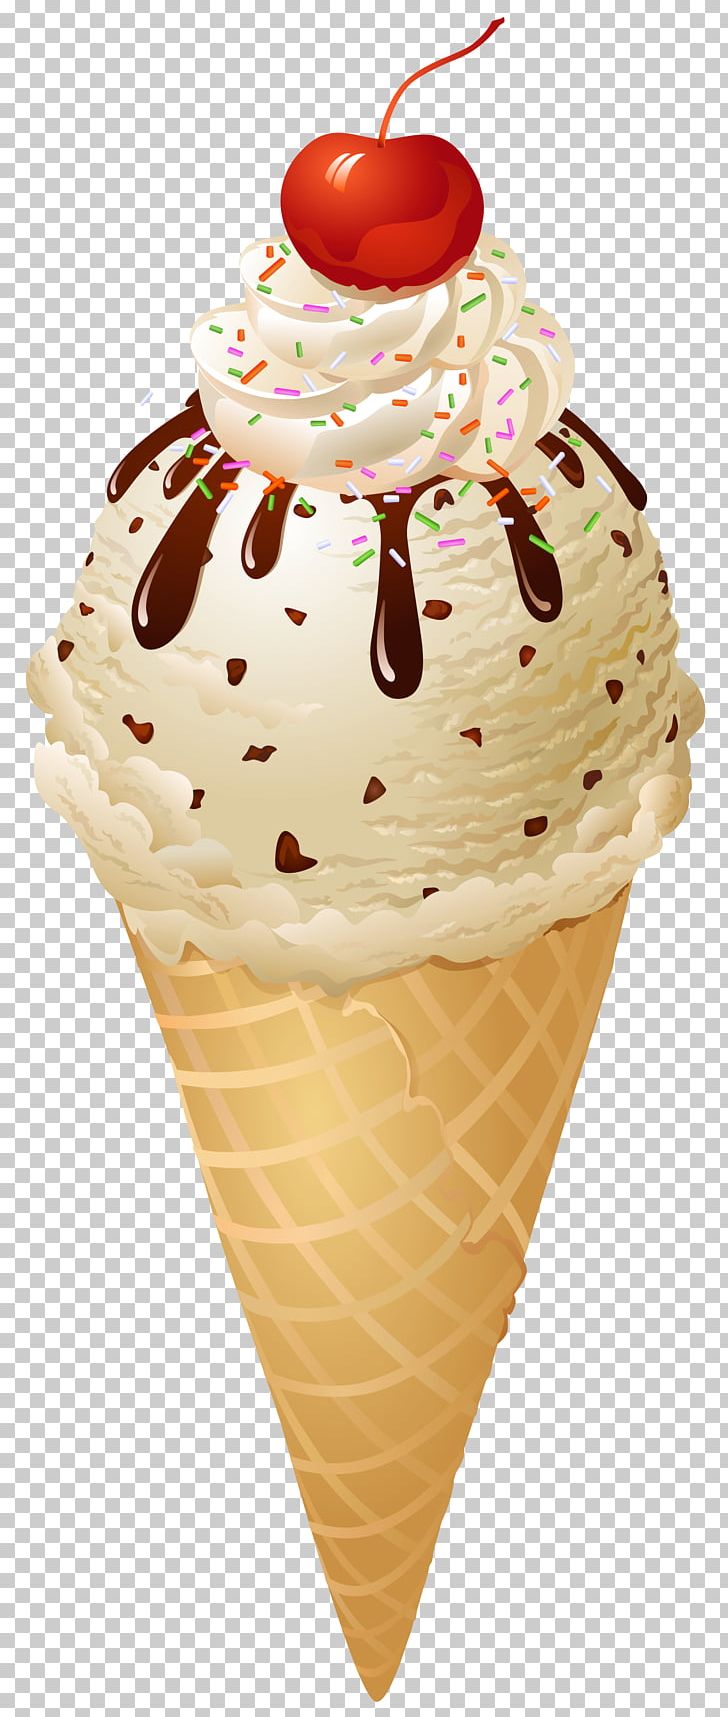 Ice Cream Cone Chocolate Ice Cream Sundae PNG, Clipart, Catering, Catering, Cream, Food, Free Logo Design Template Free PNG Download